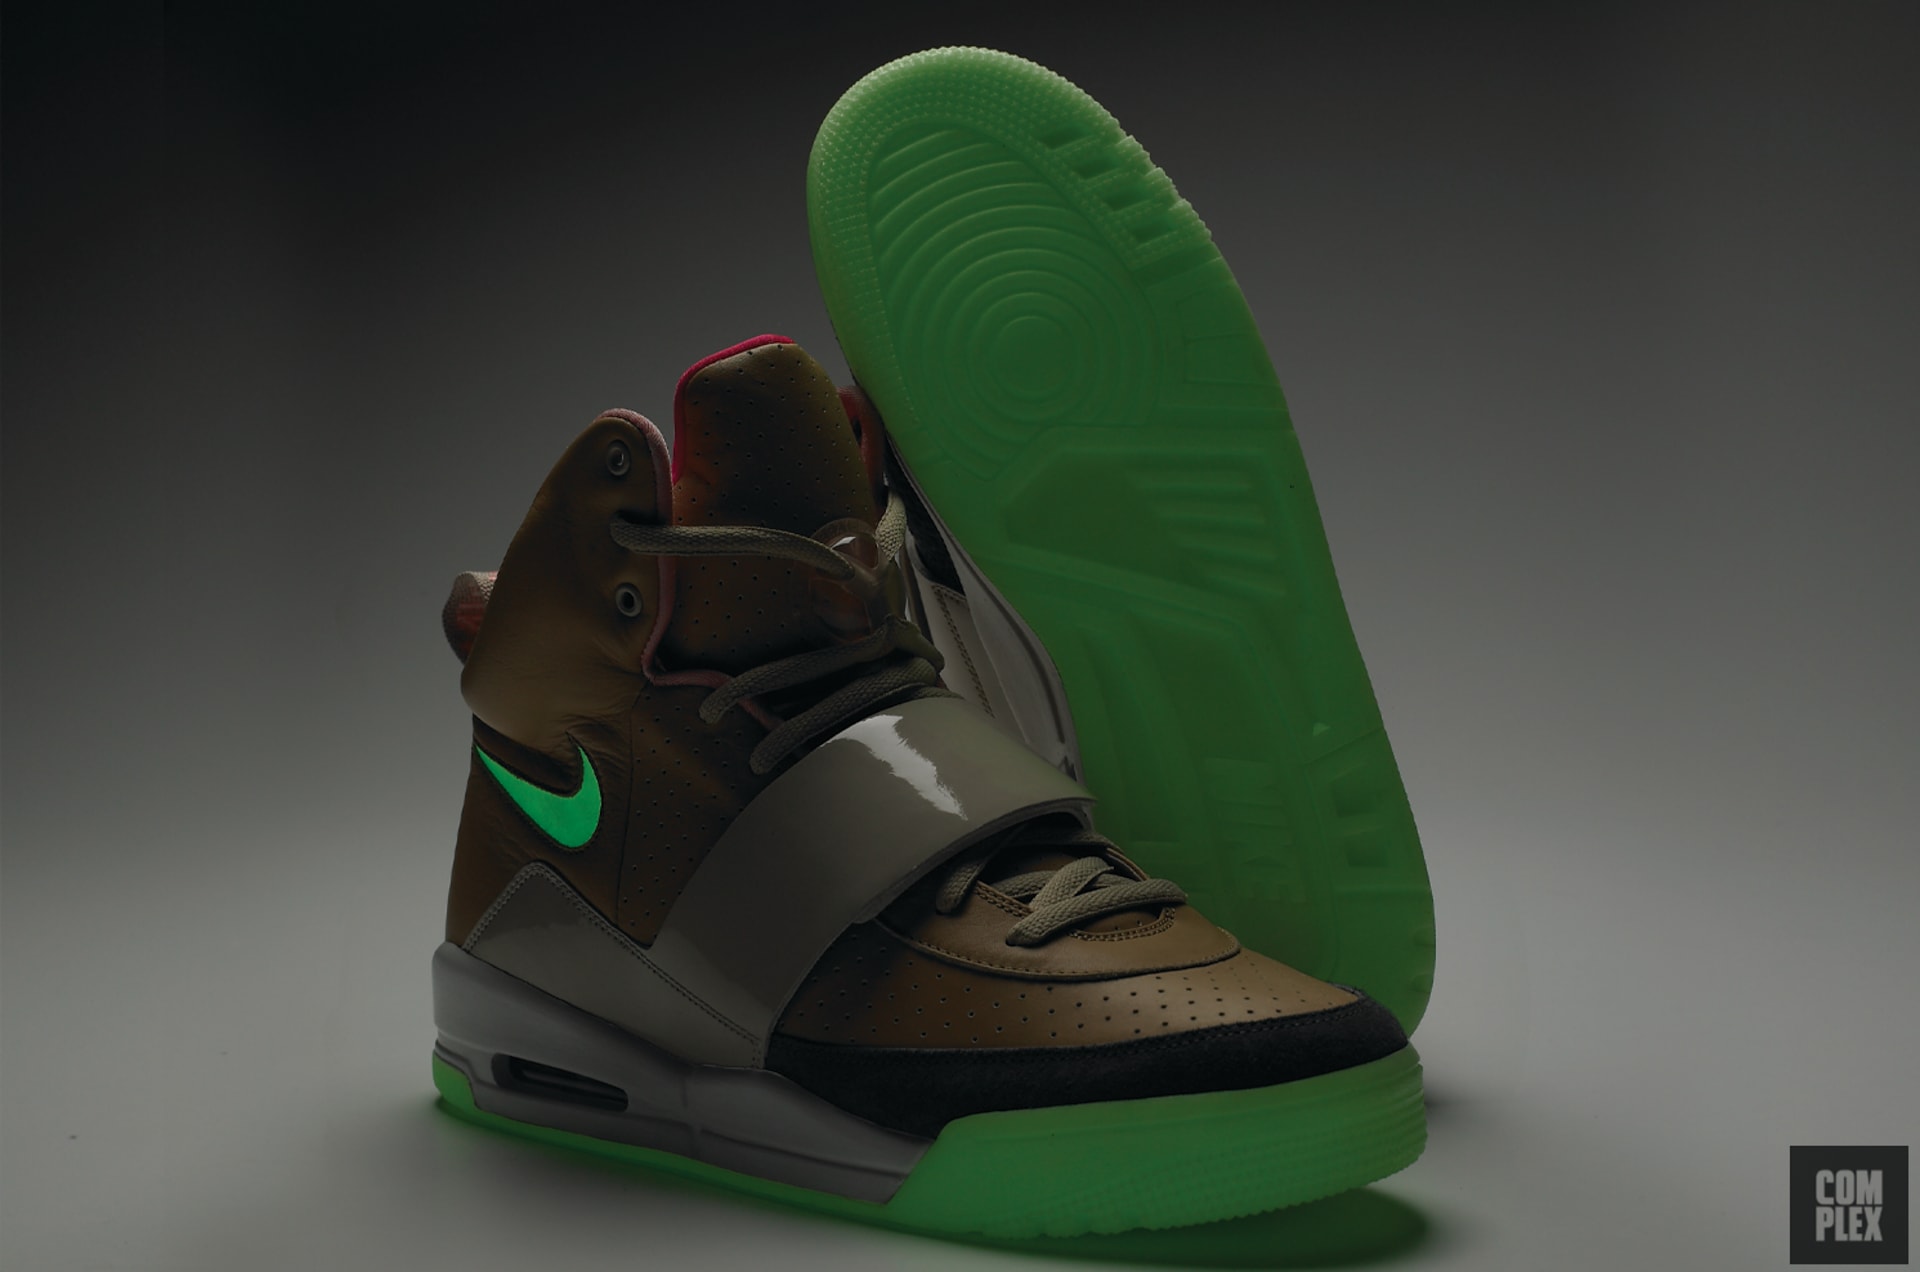 Air Yeezy Has Arrived: A Kanye West Nike Collaboration | Complex